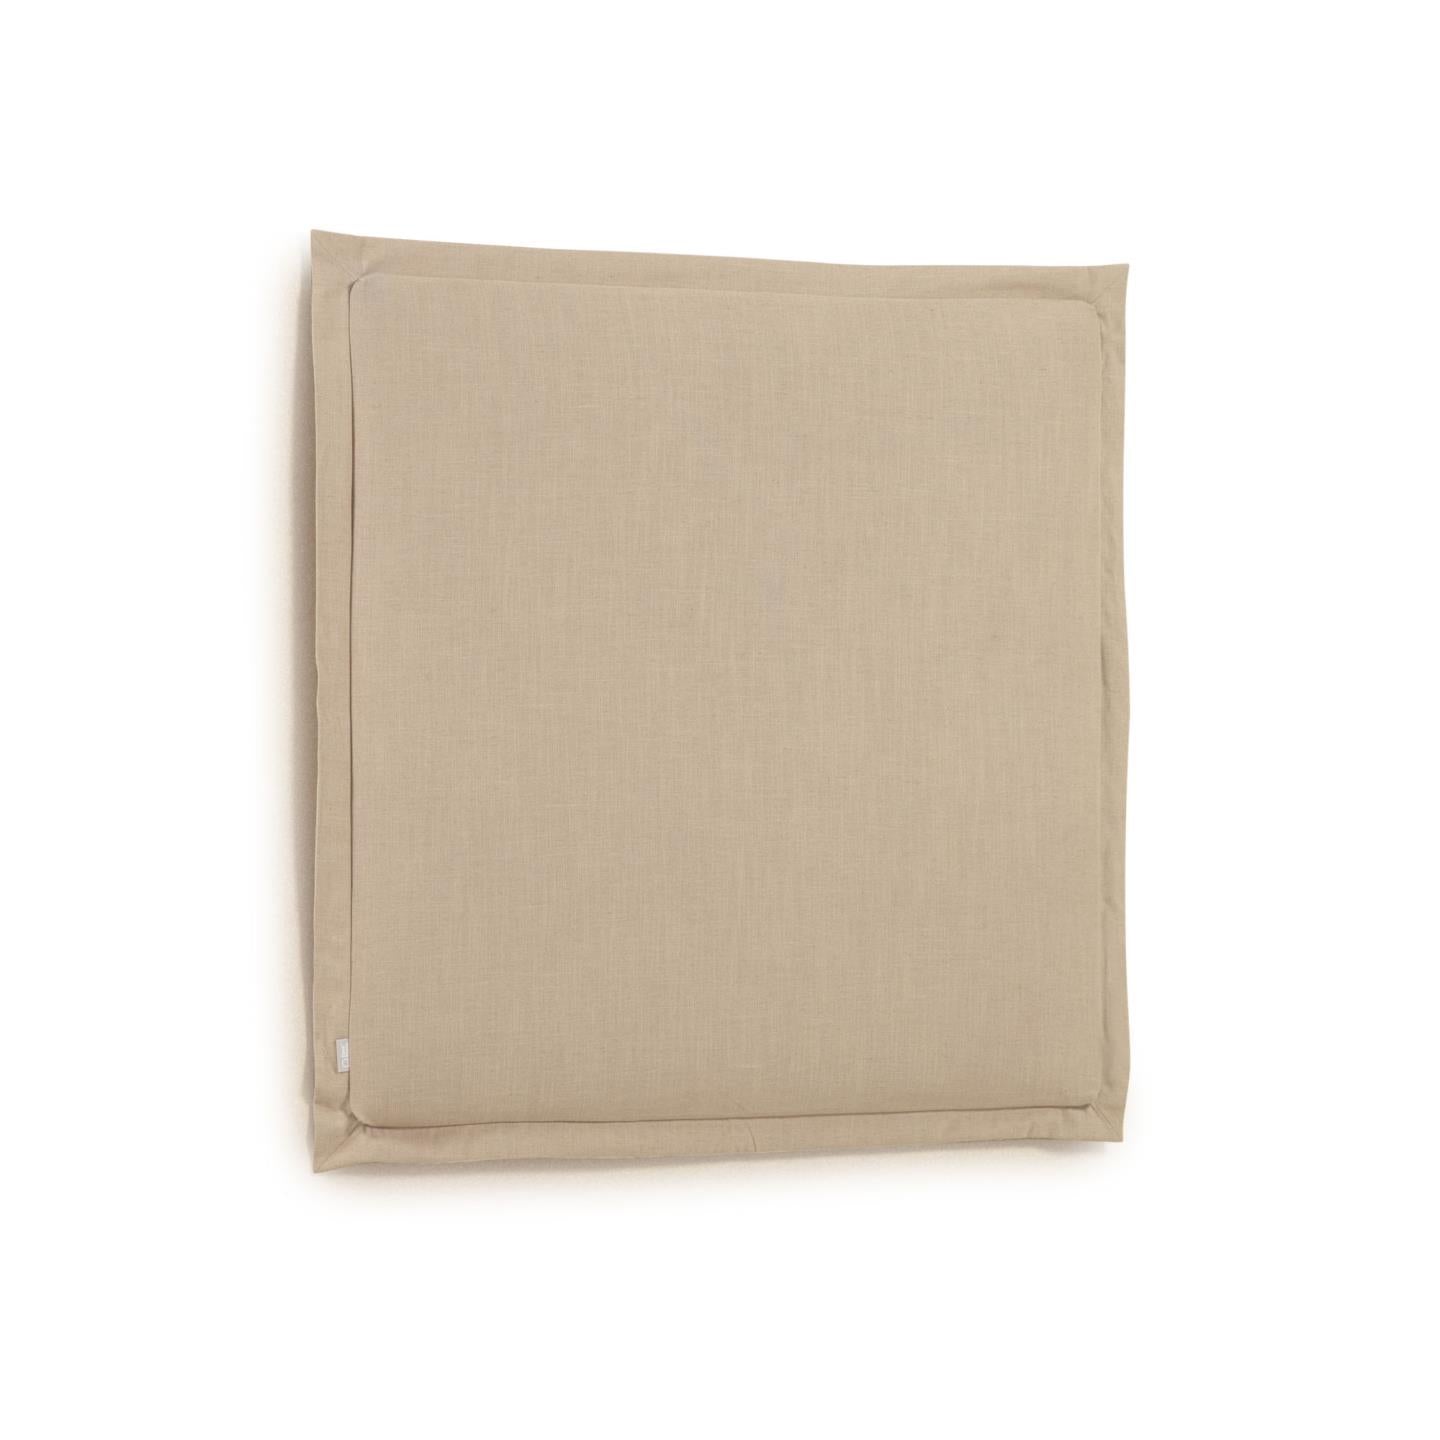 Tanit headboard with beige linen removable cover, for 90 cm beds